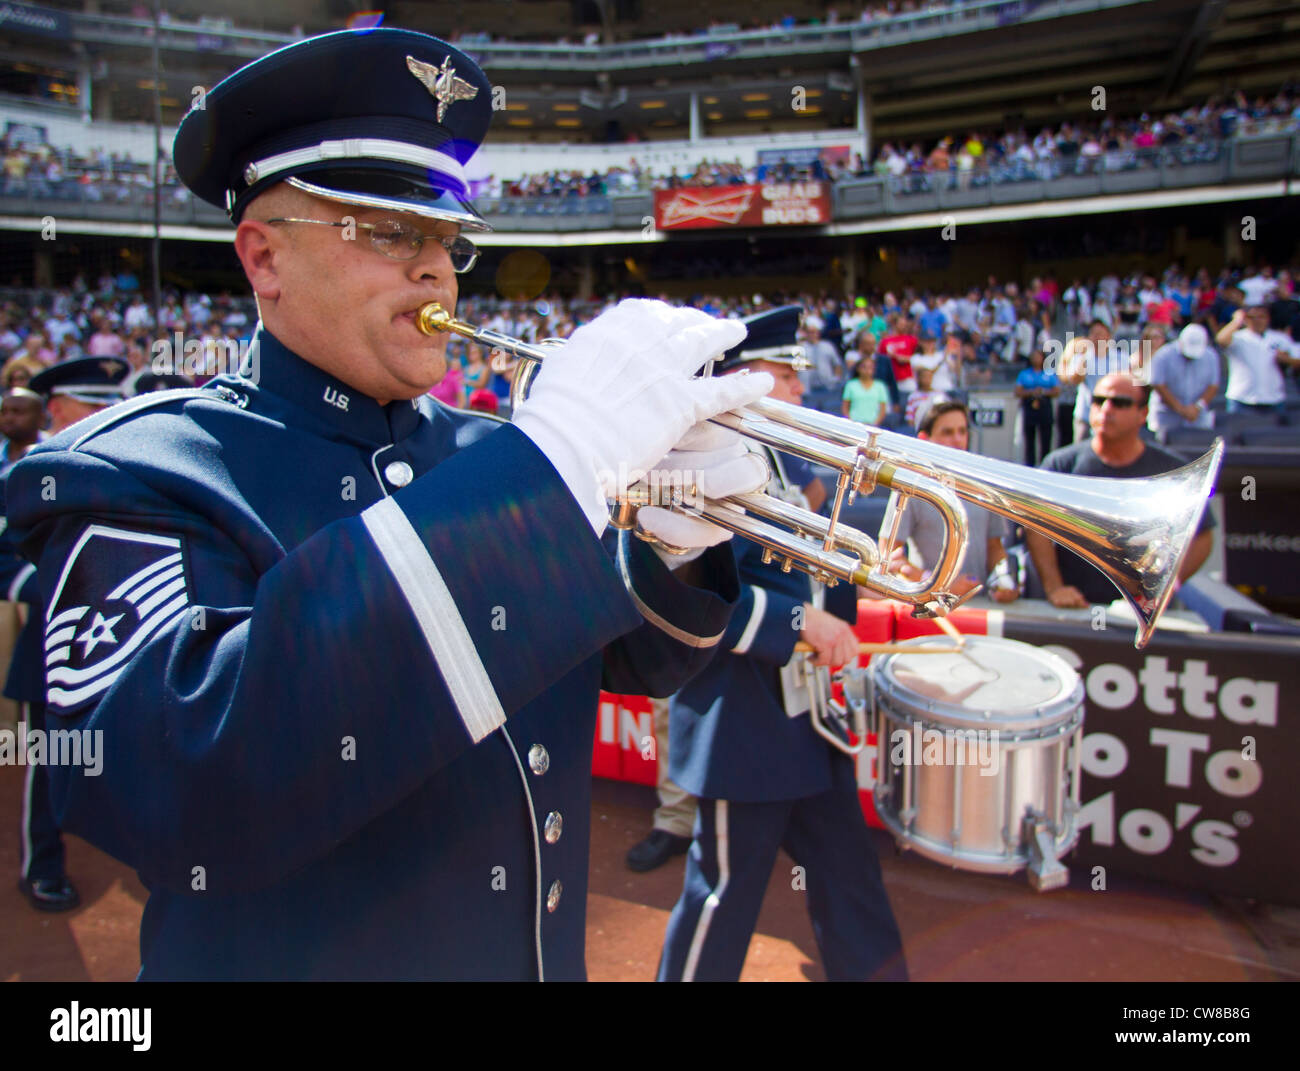 The United States Air Force Band performing before a baseball game Stock Photo